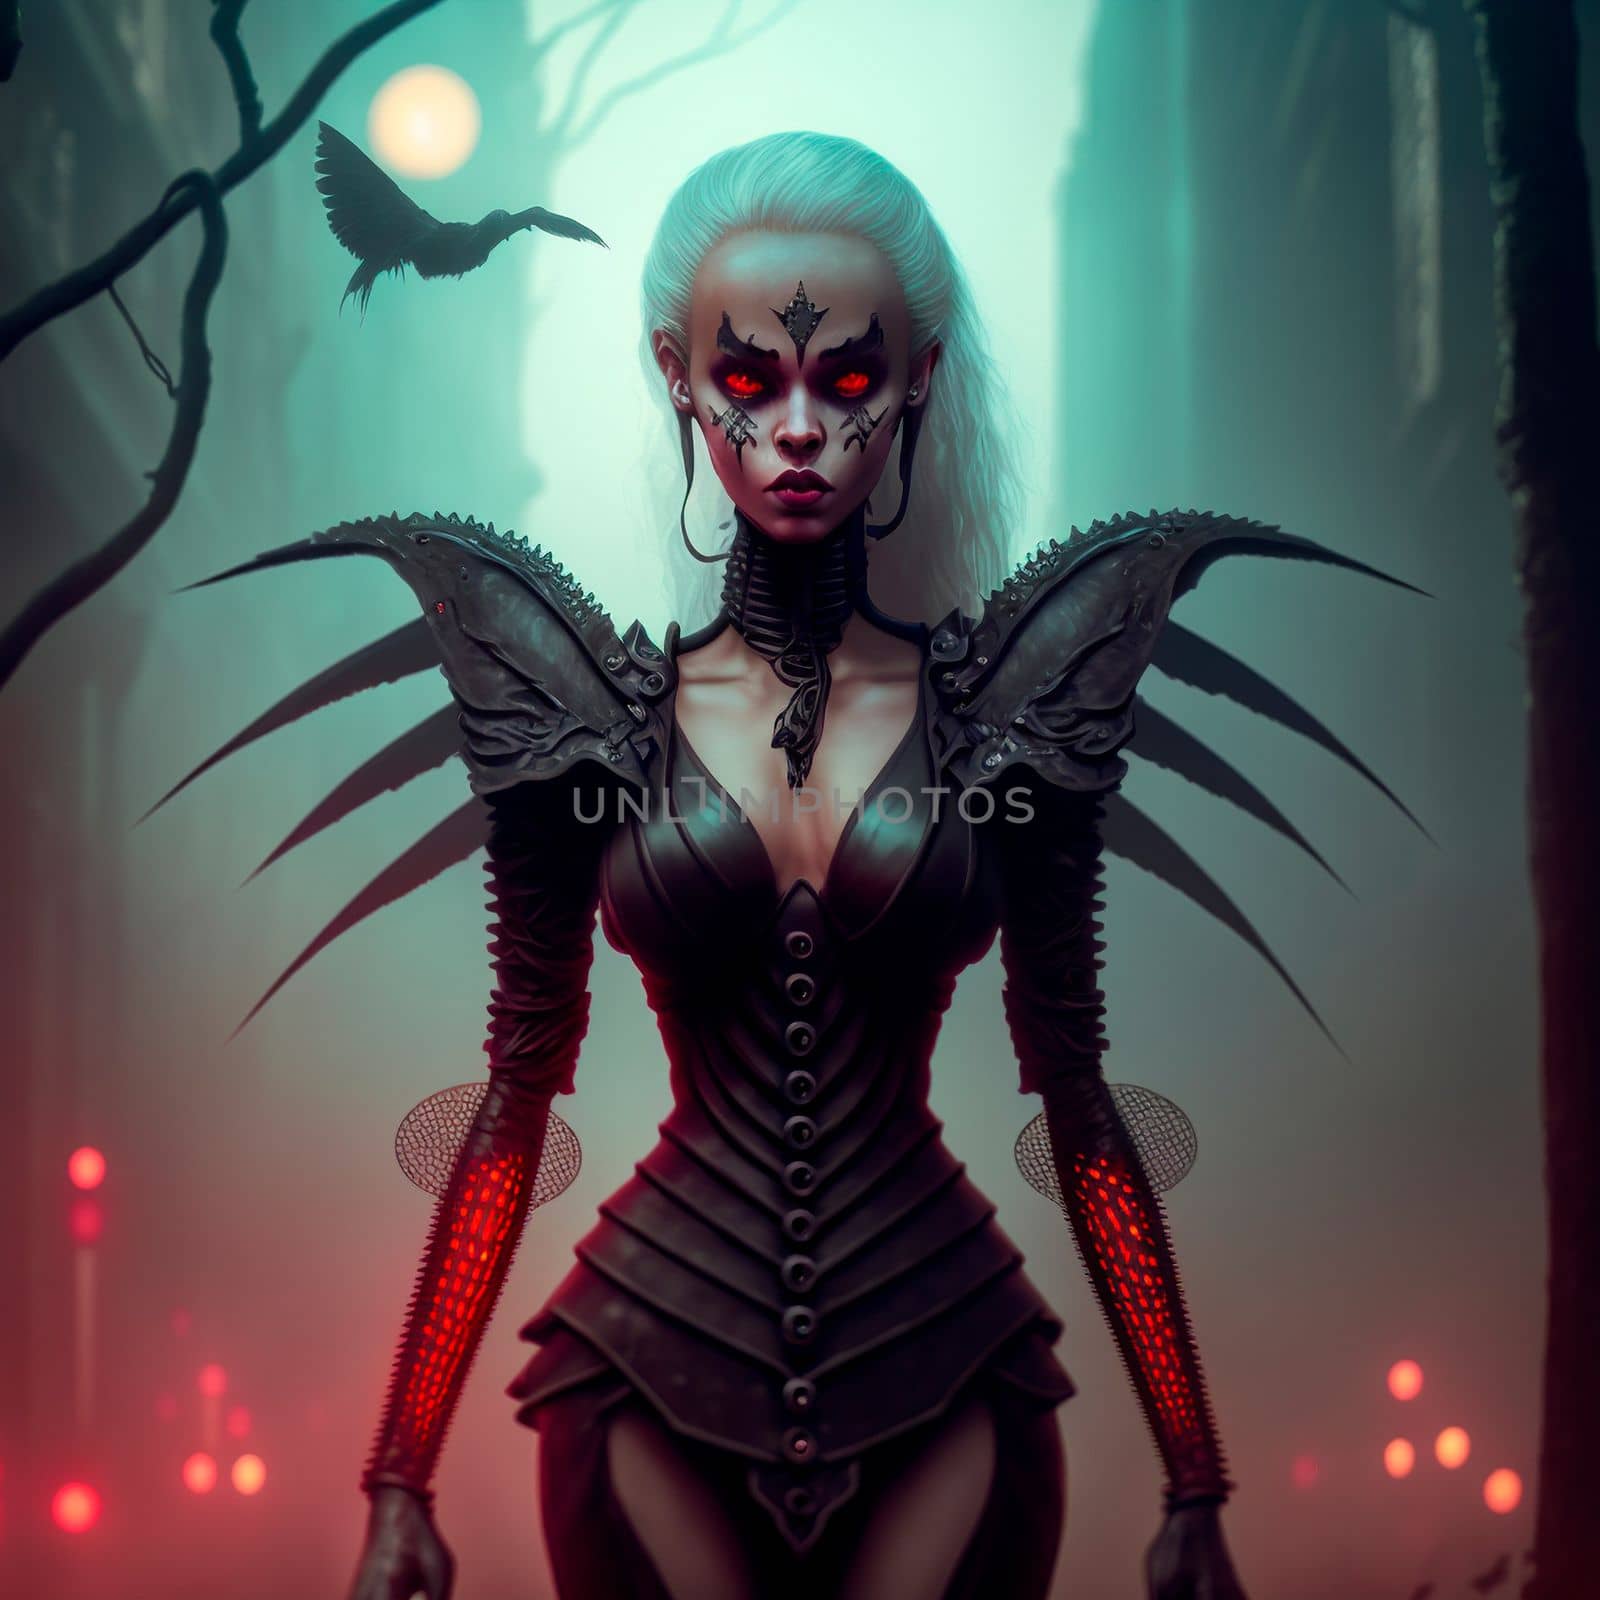 A dark and mysterious girl with red eyes in Gothic and fantasy styles by NeuroSky